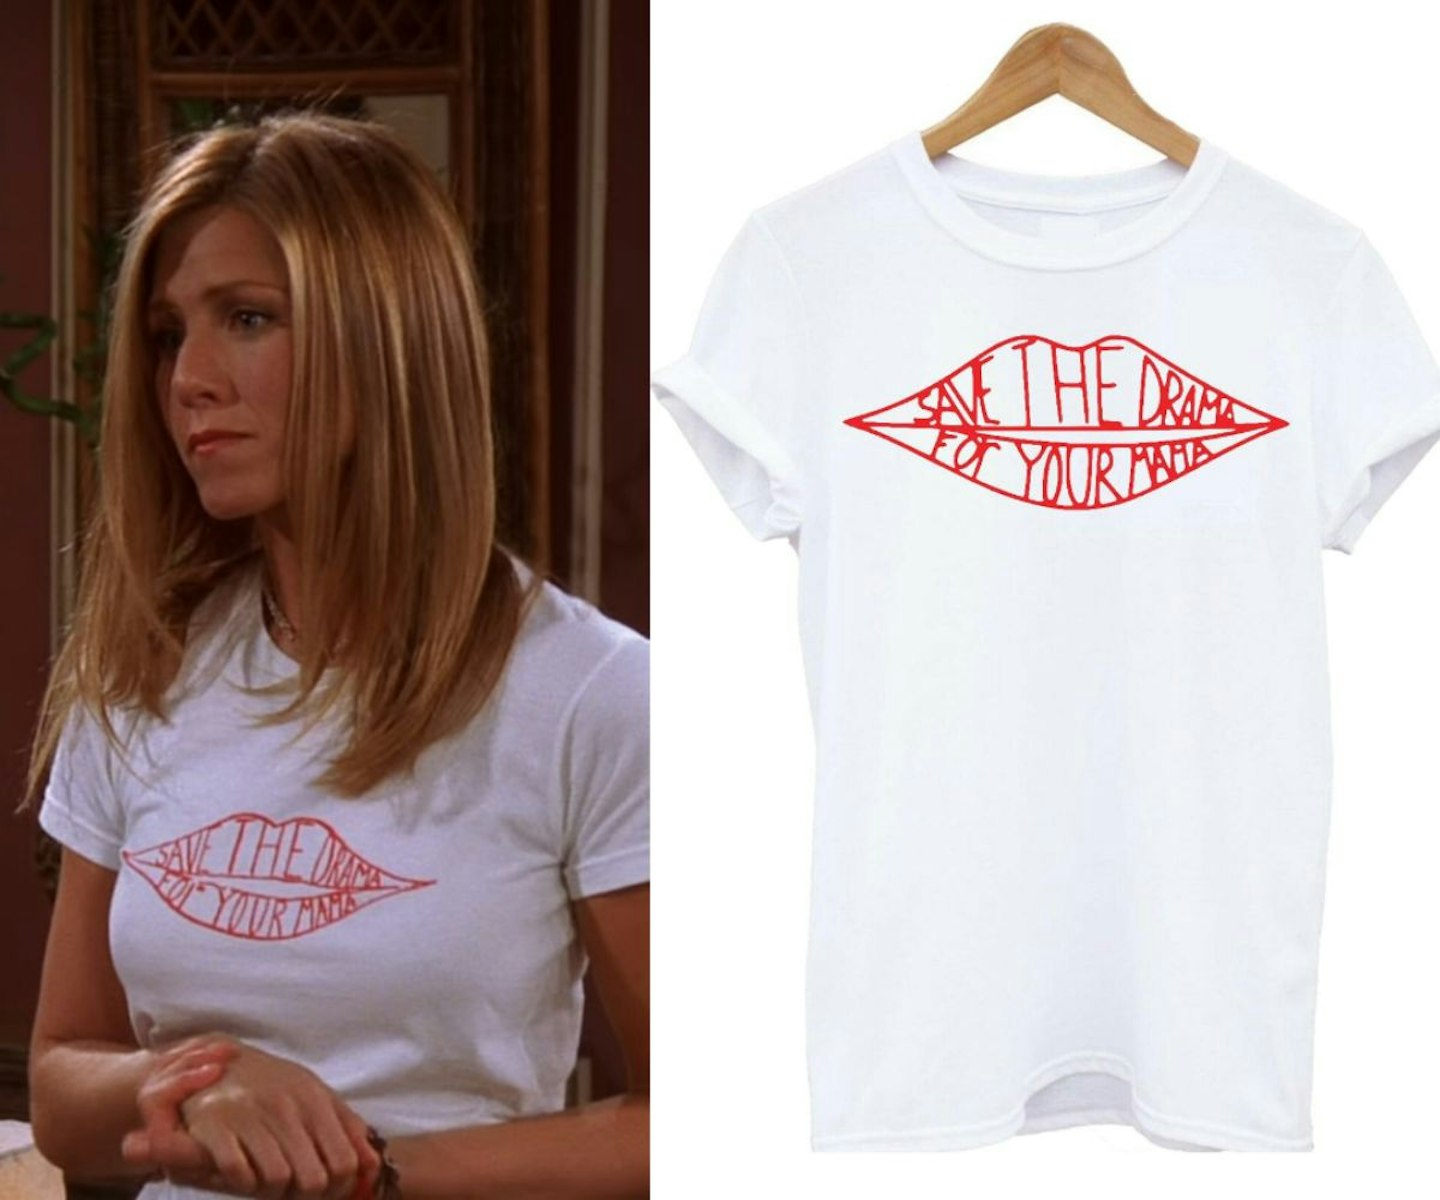 Rachel Green Inspired Summer Shopping and Owning One of Her